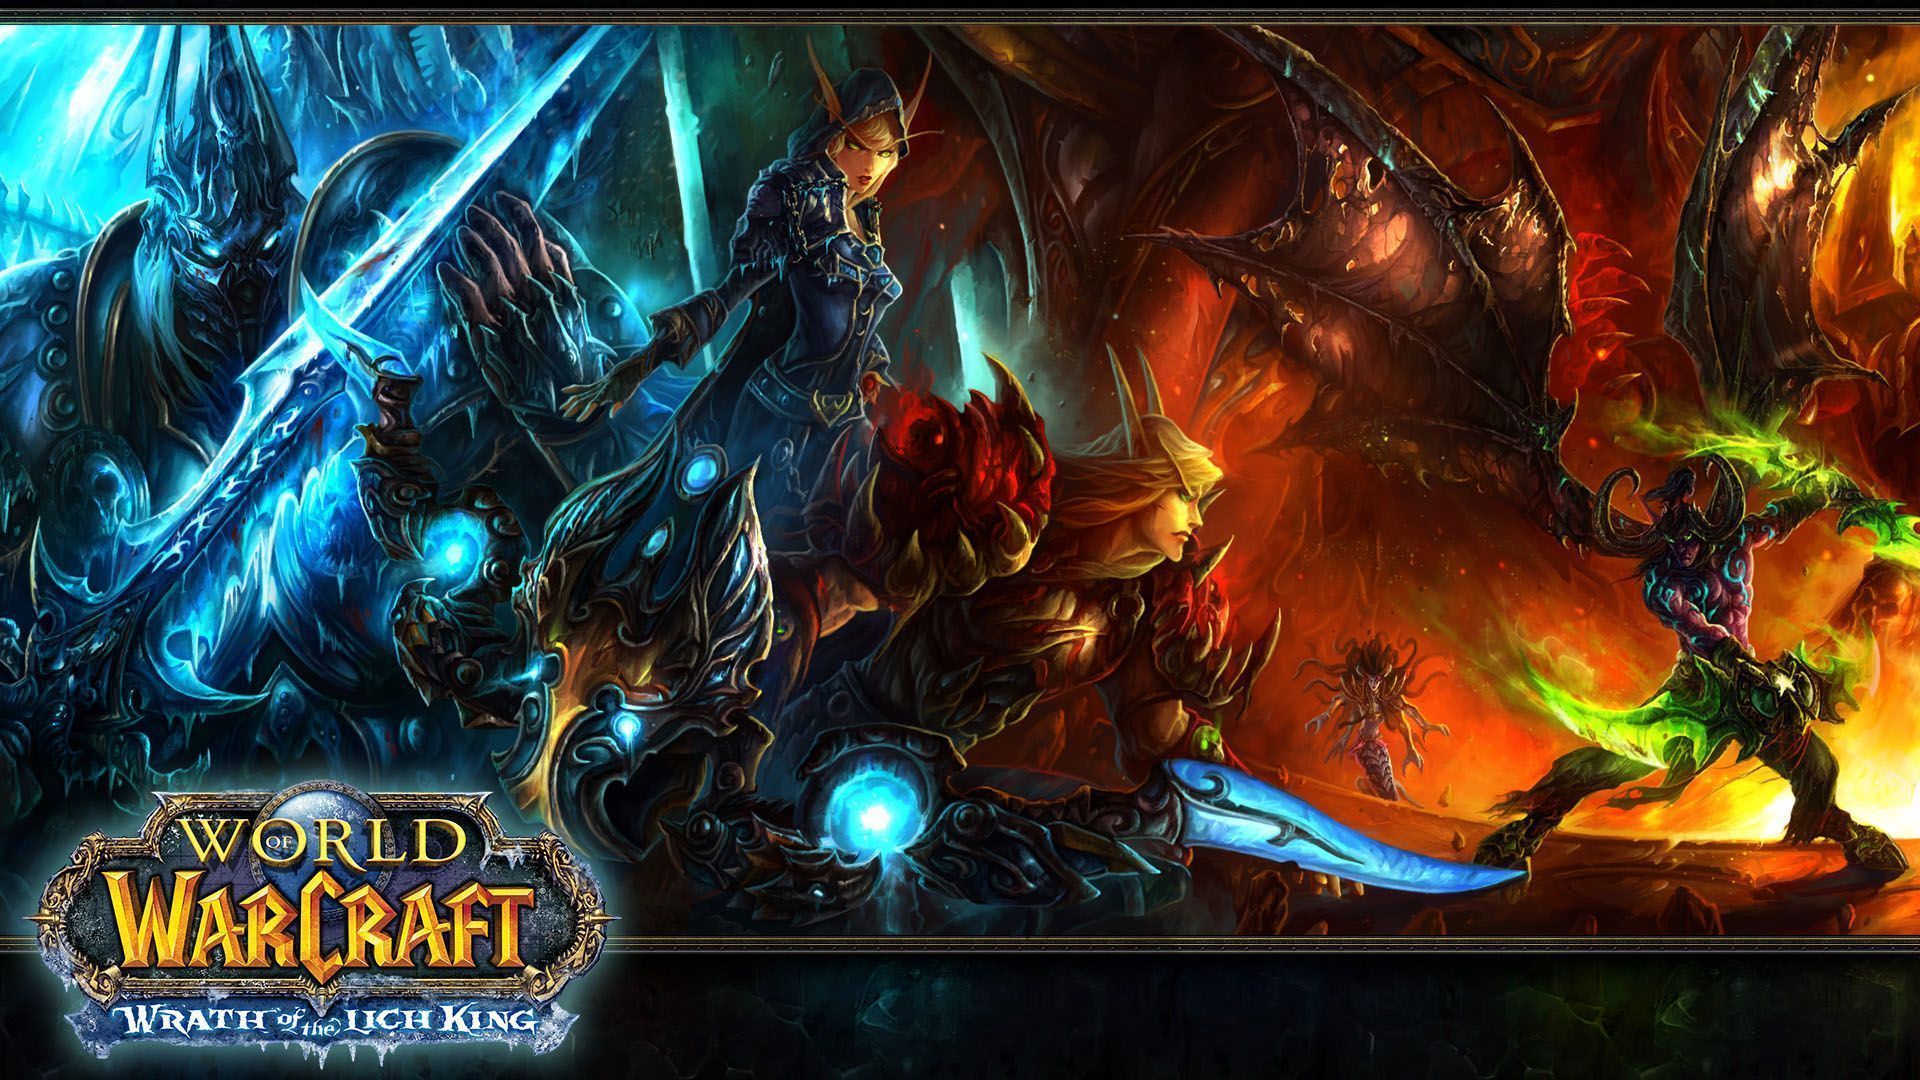 World of Warcraft Wrath of the Lich King - 1920x1080 - Full HD 16